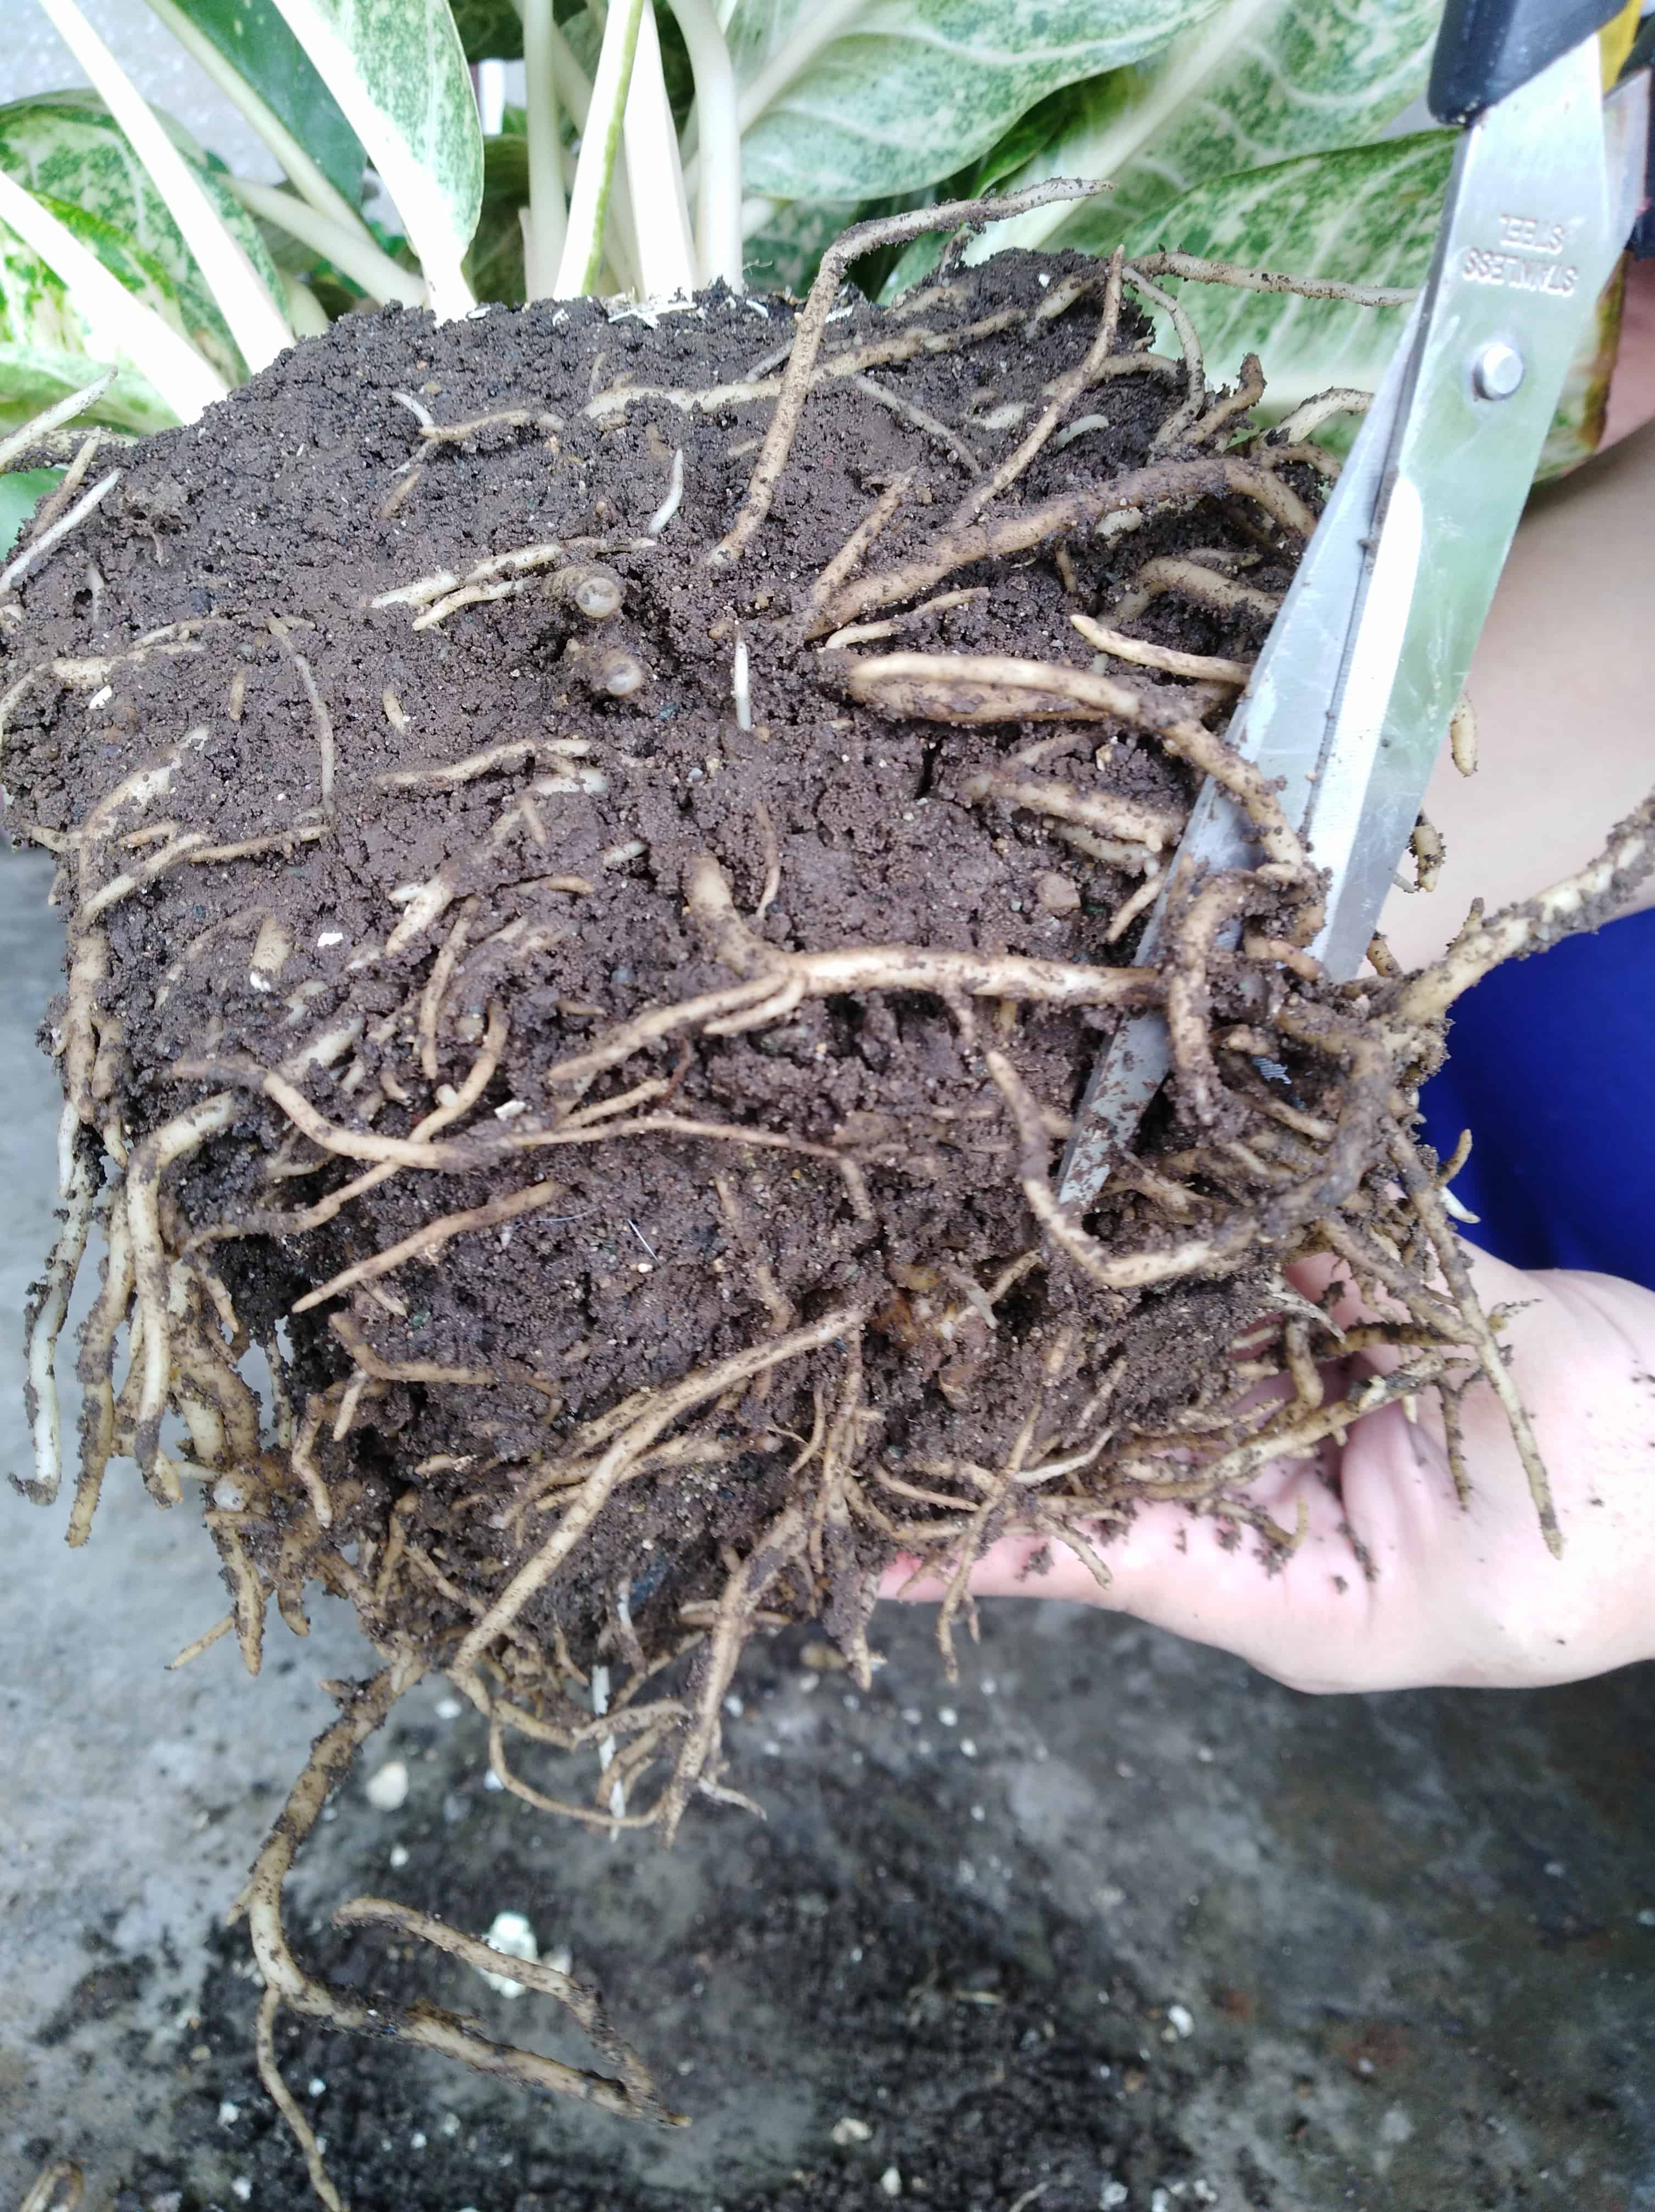 Trimming off long roots circling the rootball.